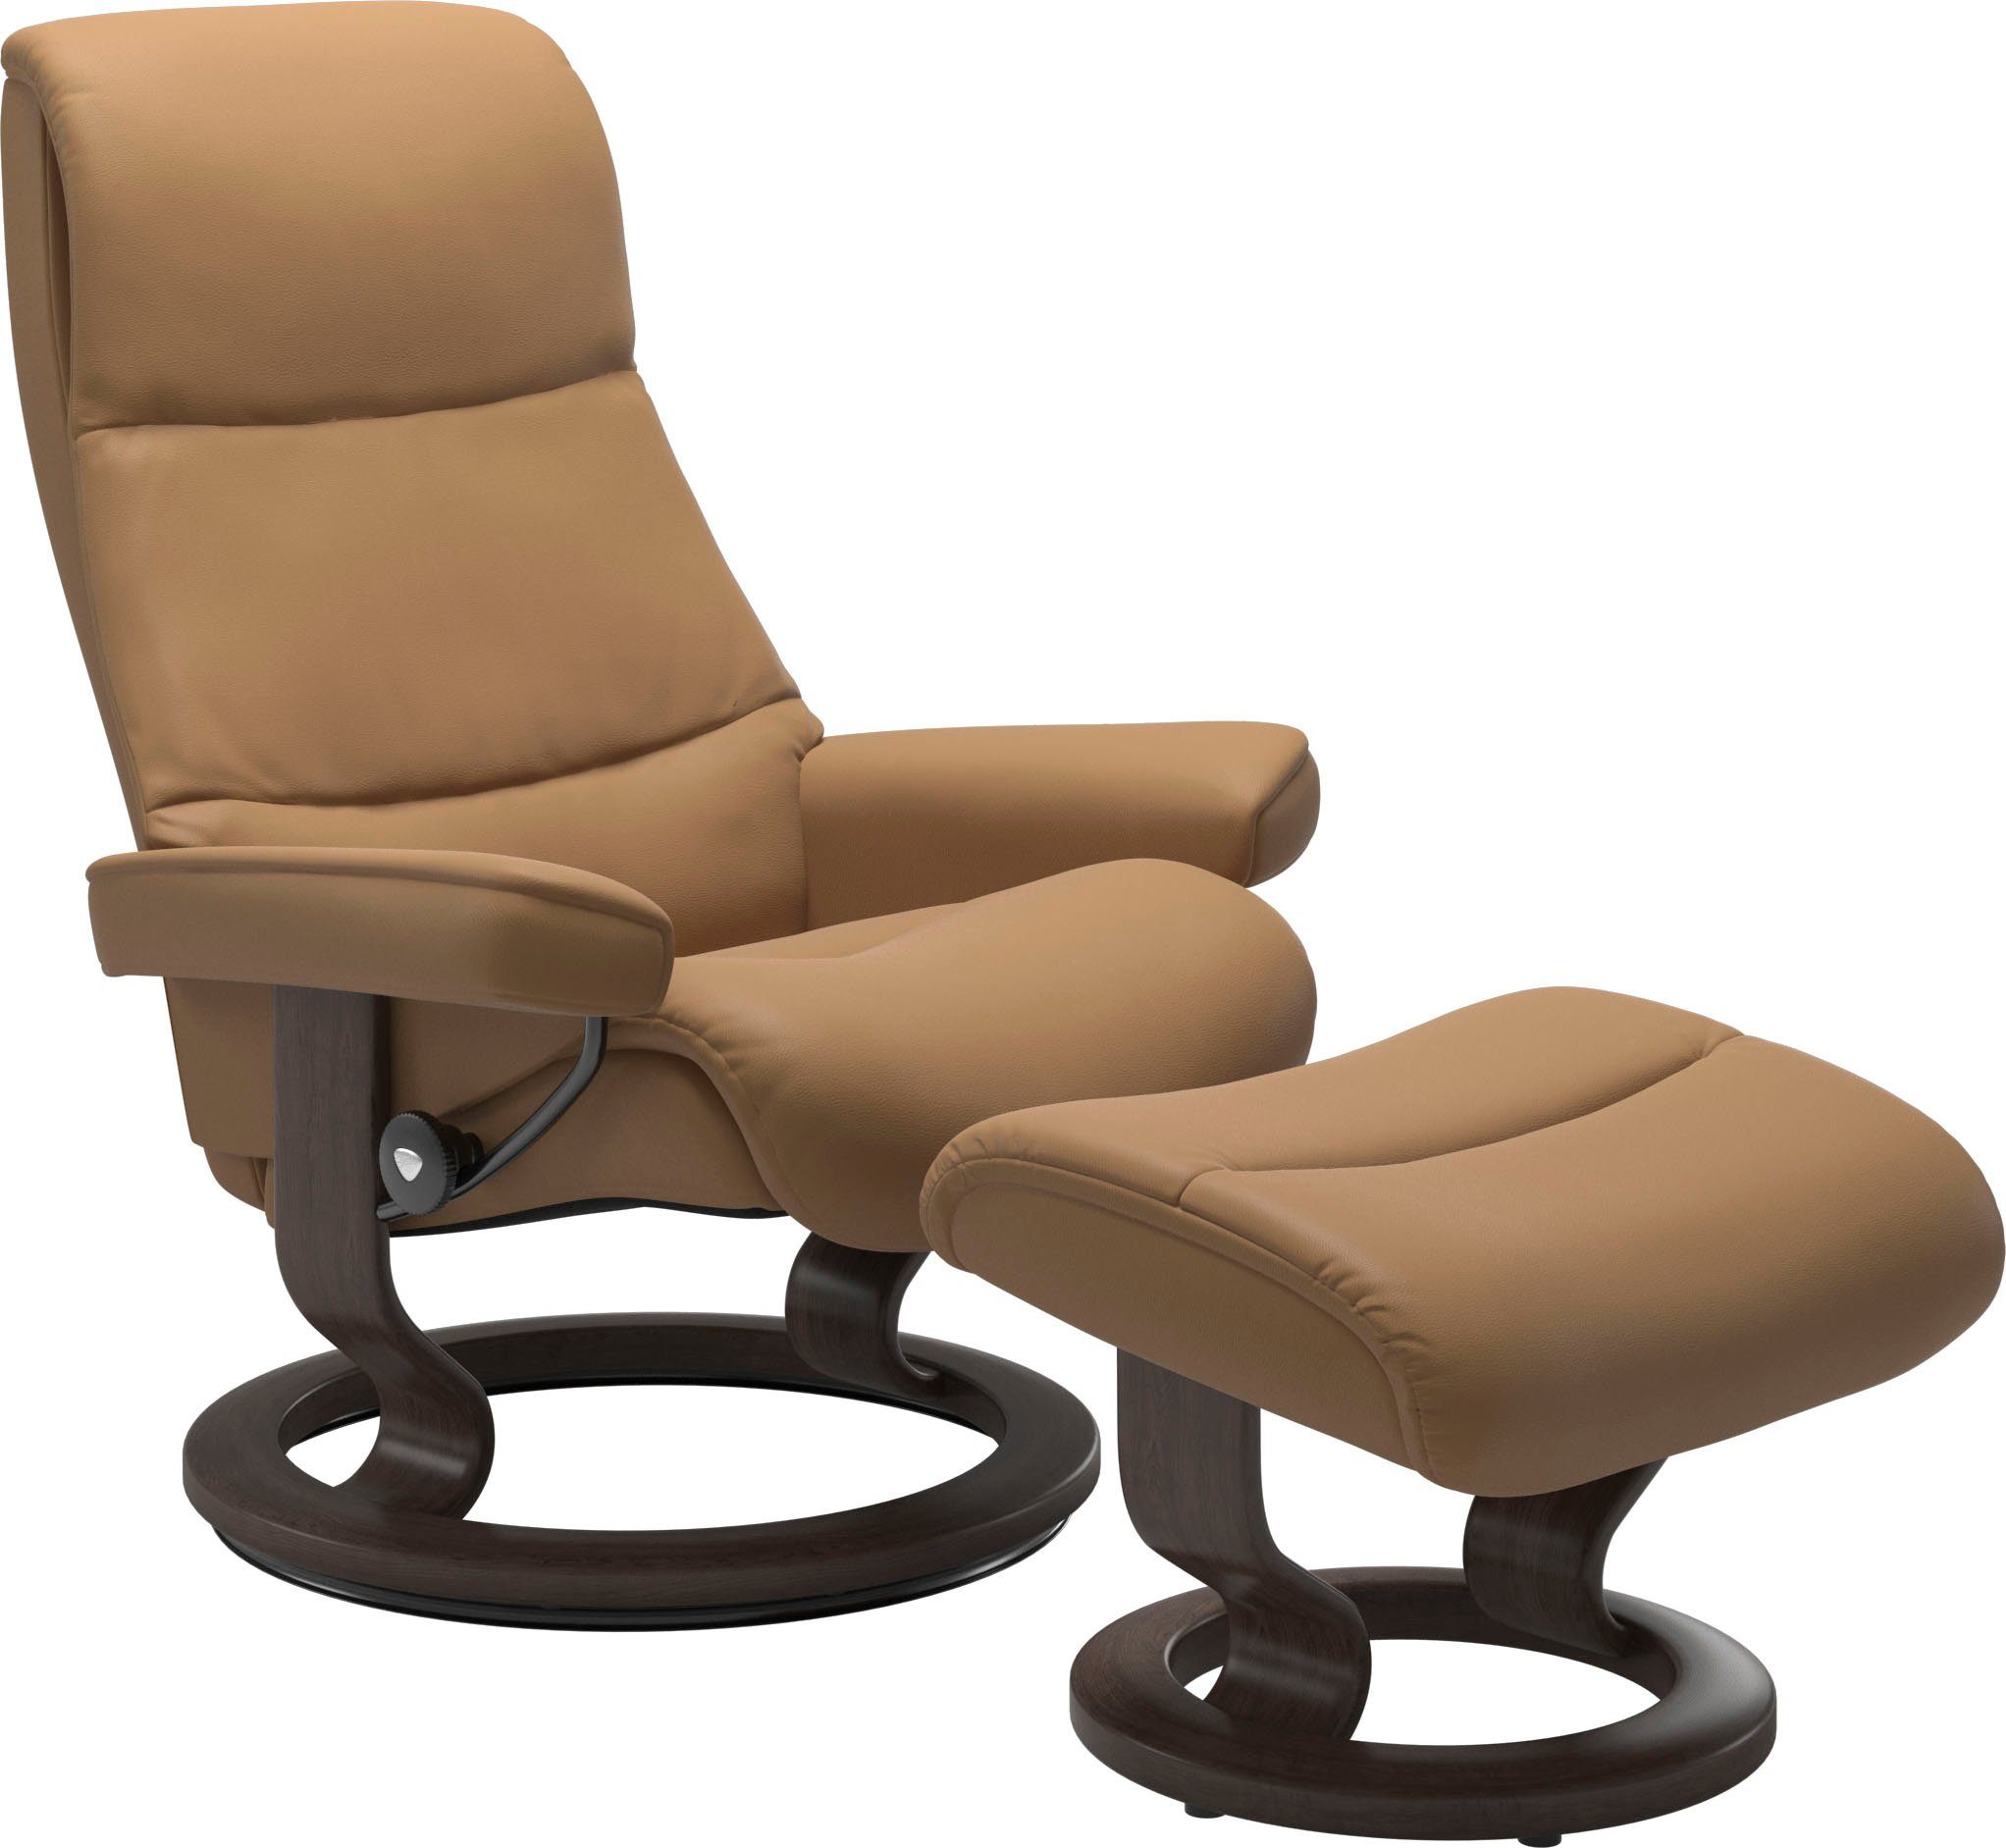 Classic Relaxsessel M,Gestell mit Größe Stressless® Wenge Base, View,